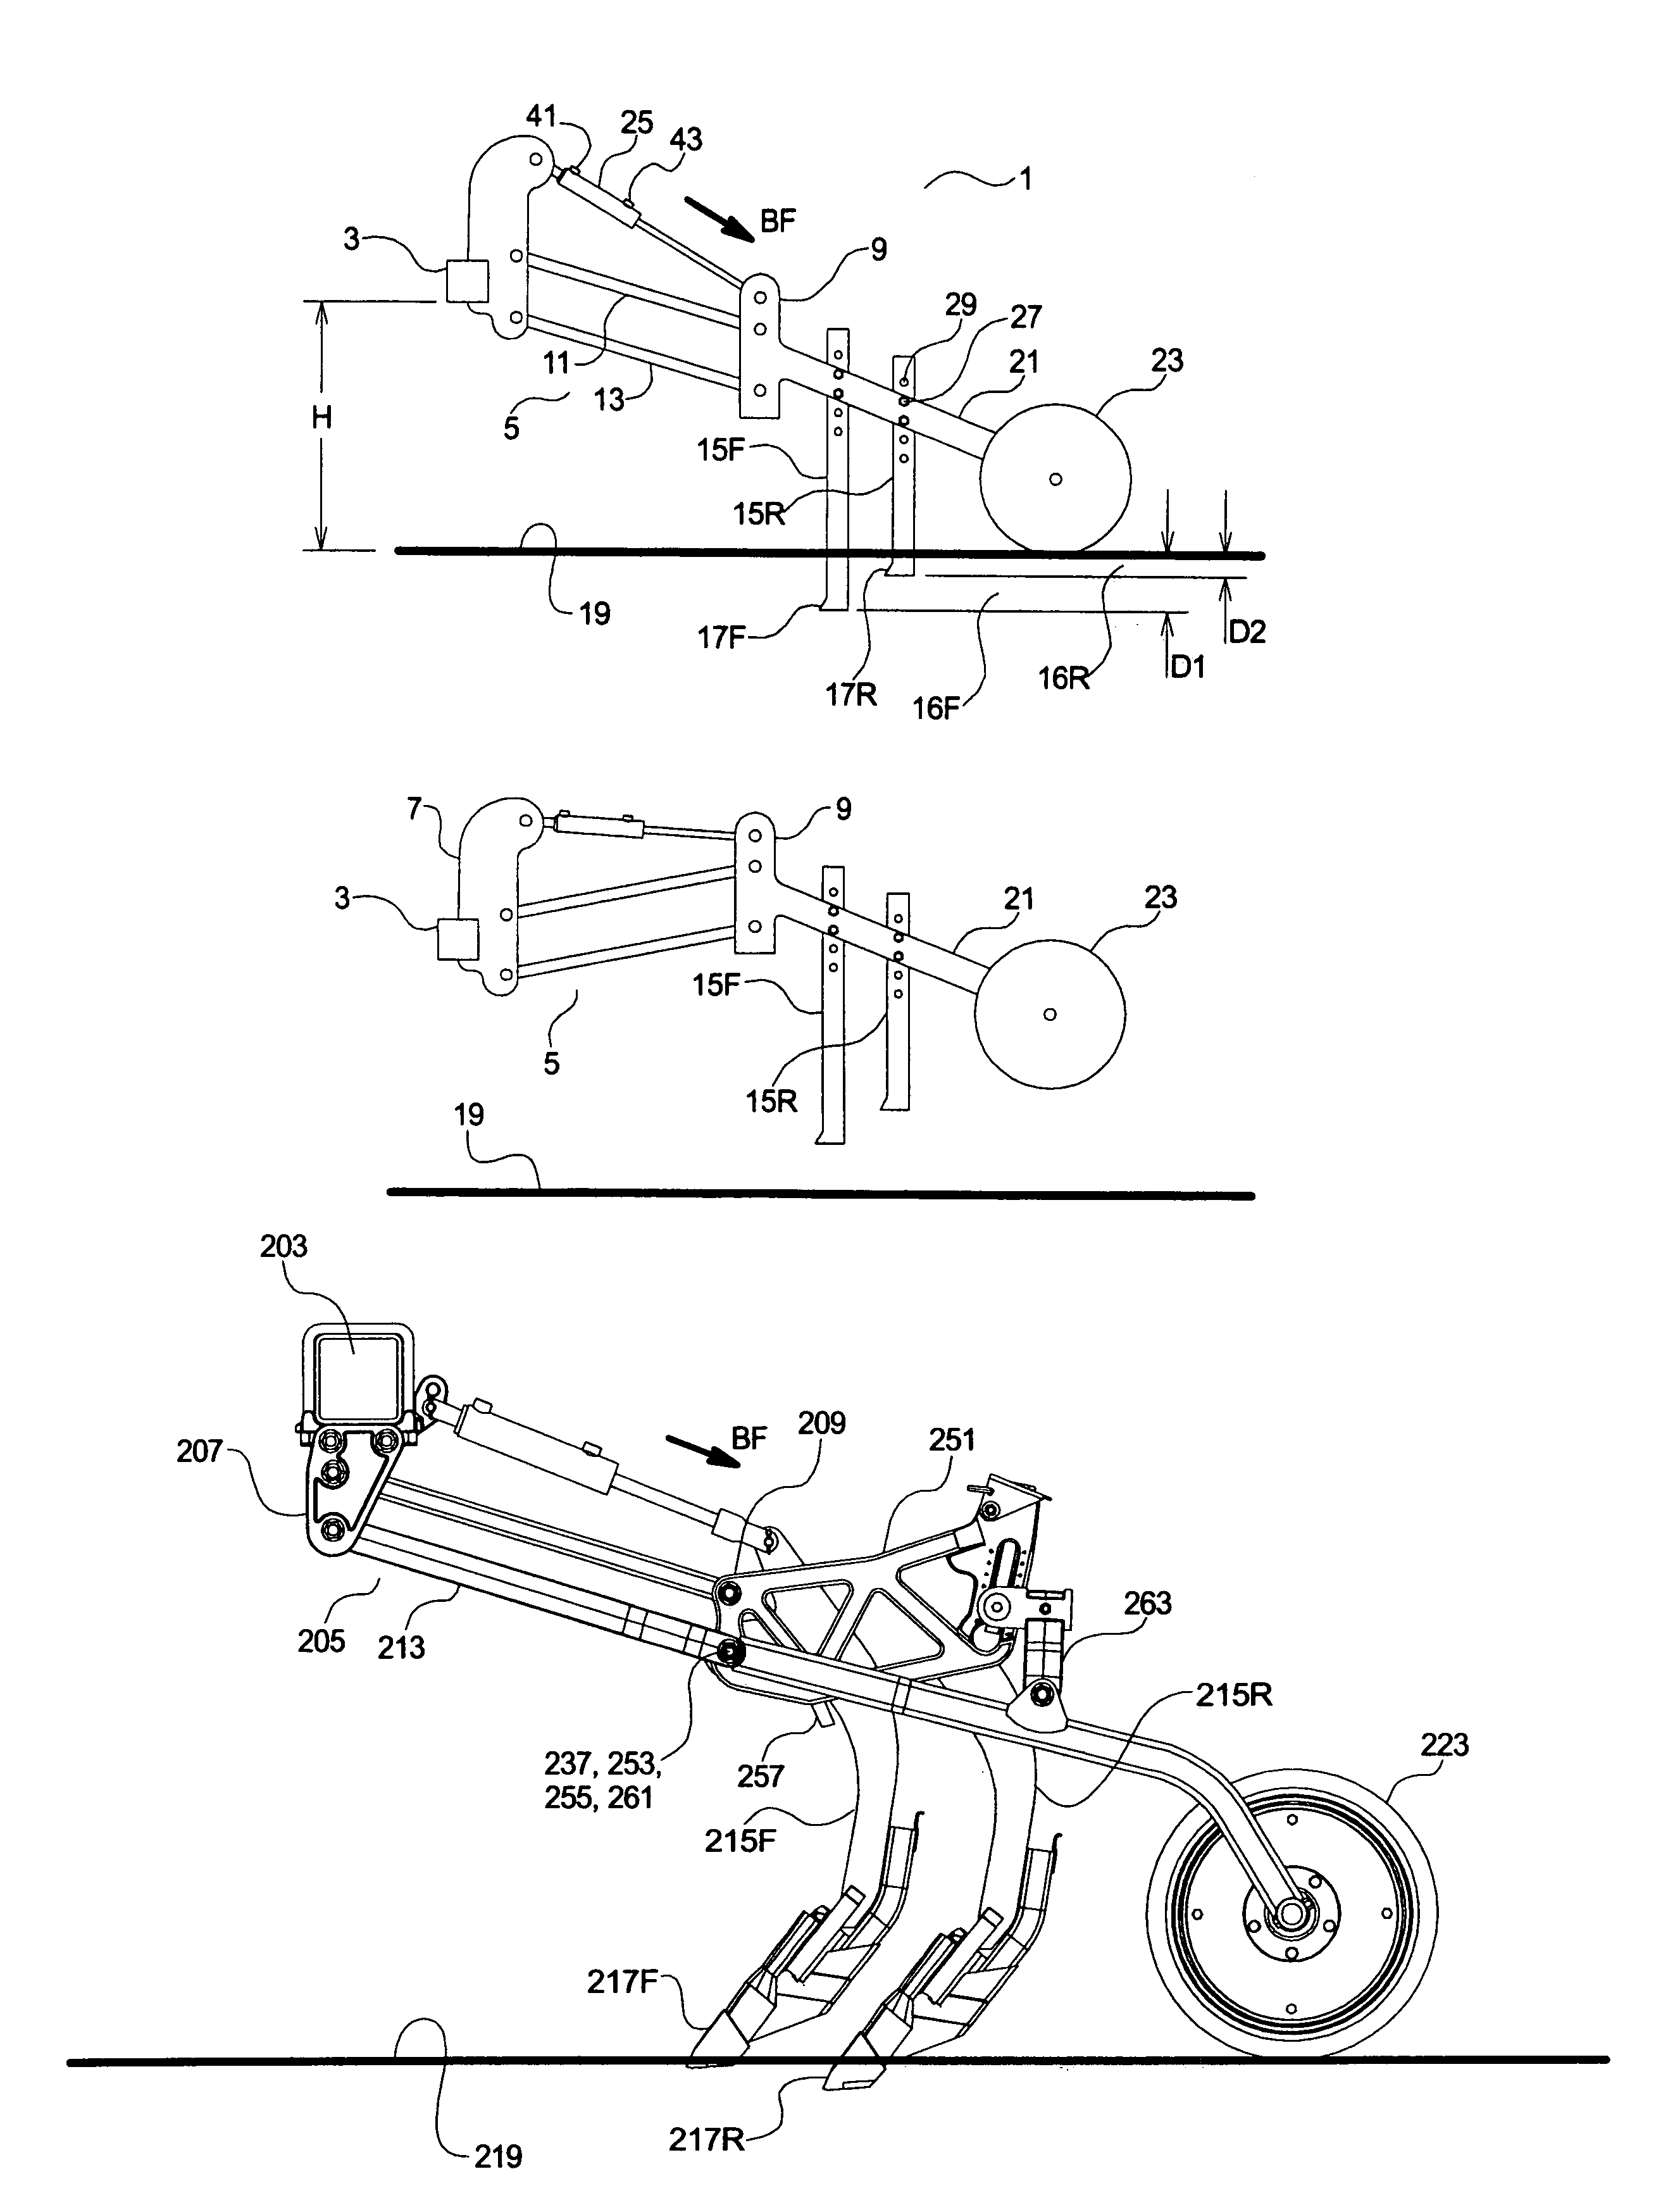 Parallel link trailing arm for seeders